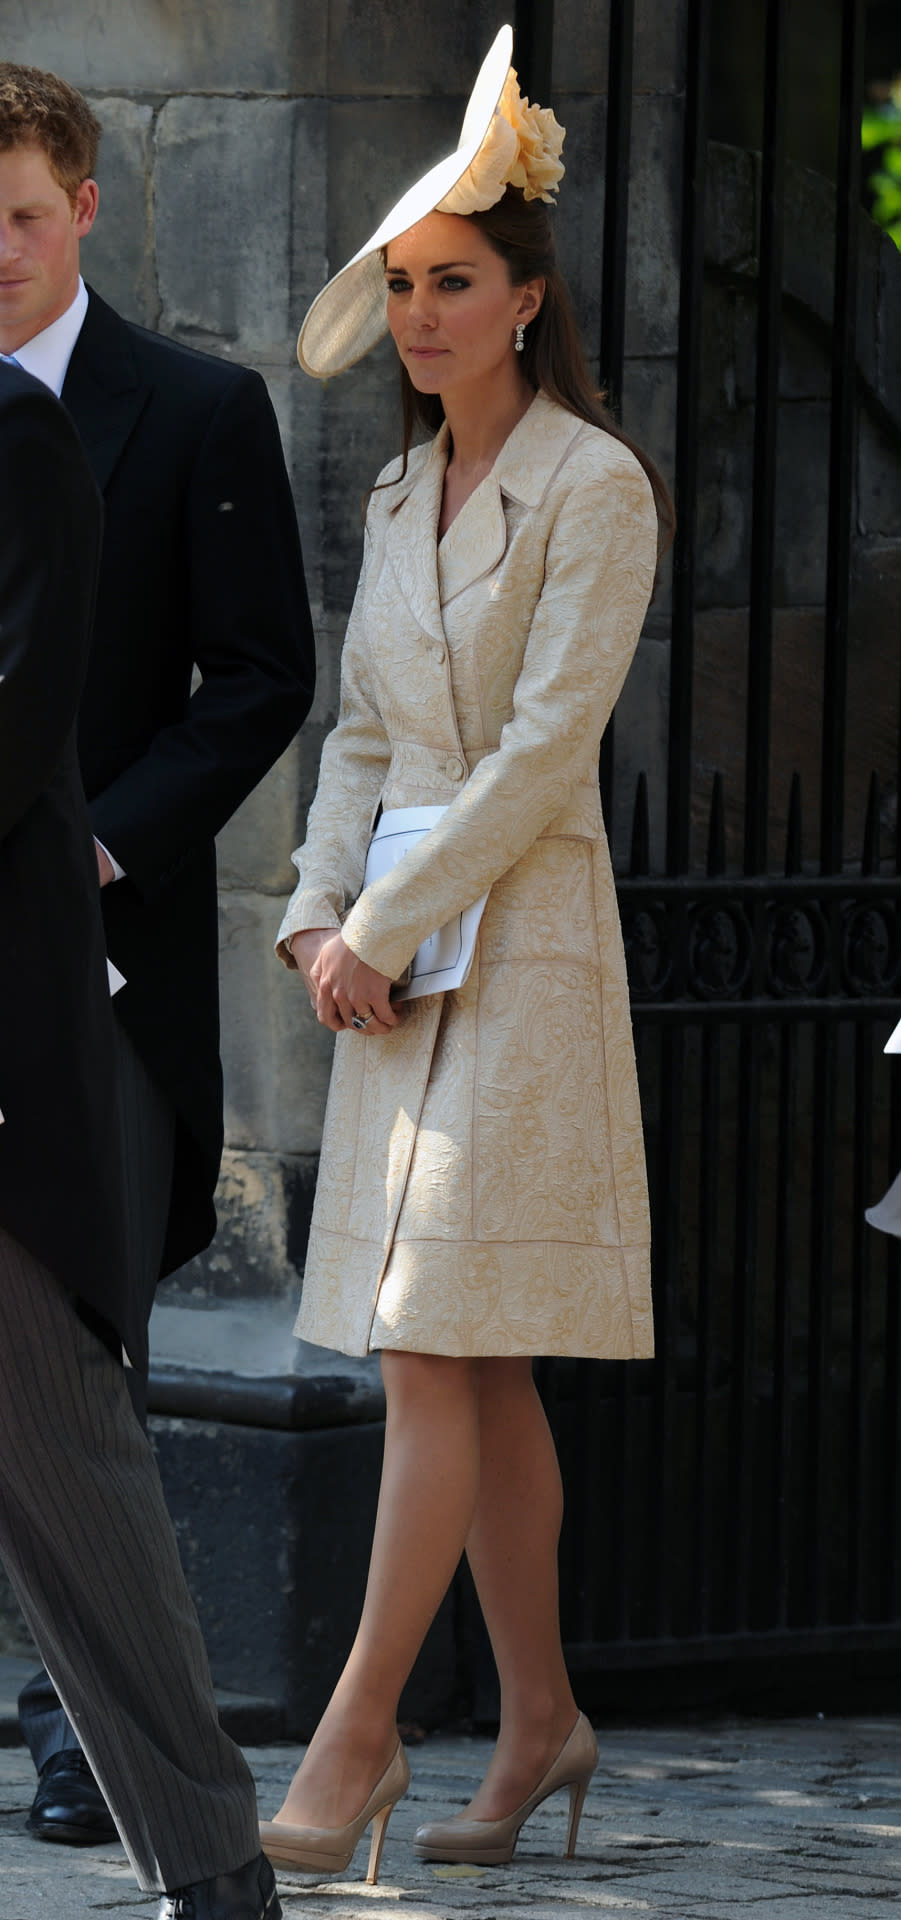 <p>For Zara Phillips’ wedding to Mike Tindall, Kate donned a gold brocade coat by Day Birger et Mikkelsen and a large hat designer by Gina Foster. Her shoes and bag were both from L.K. Bennett.</p><p><i>[Photo: PA]</i></p>